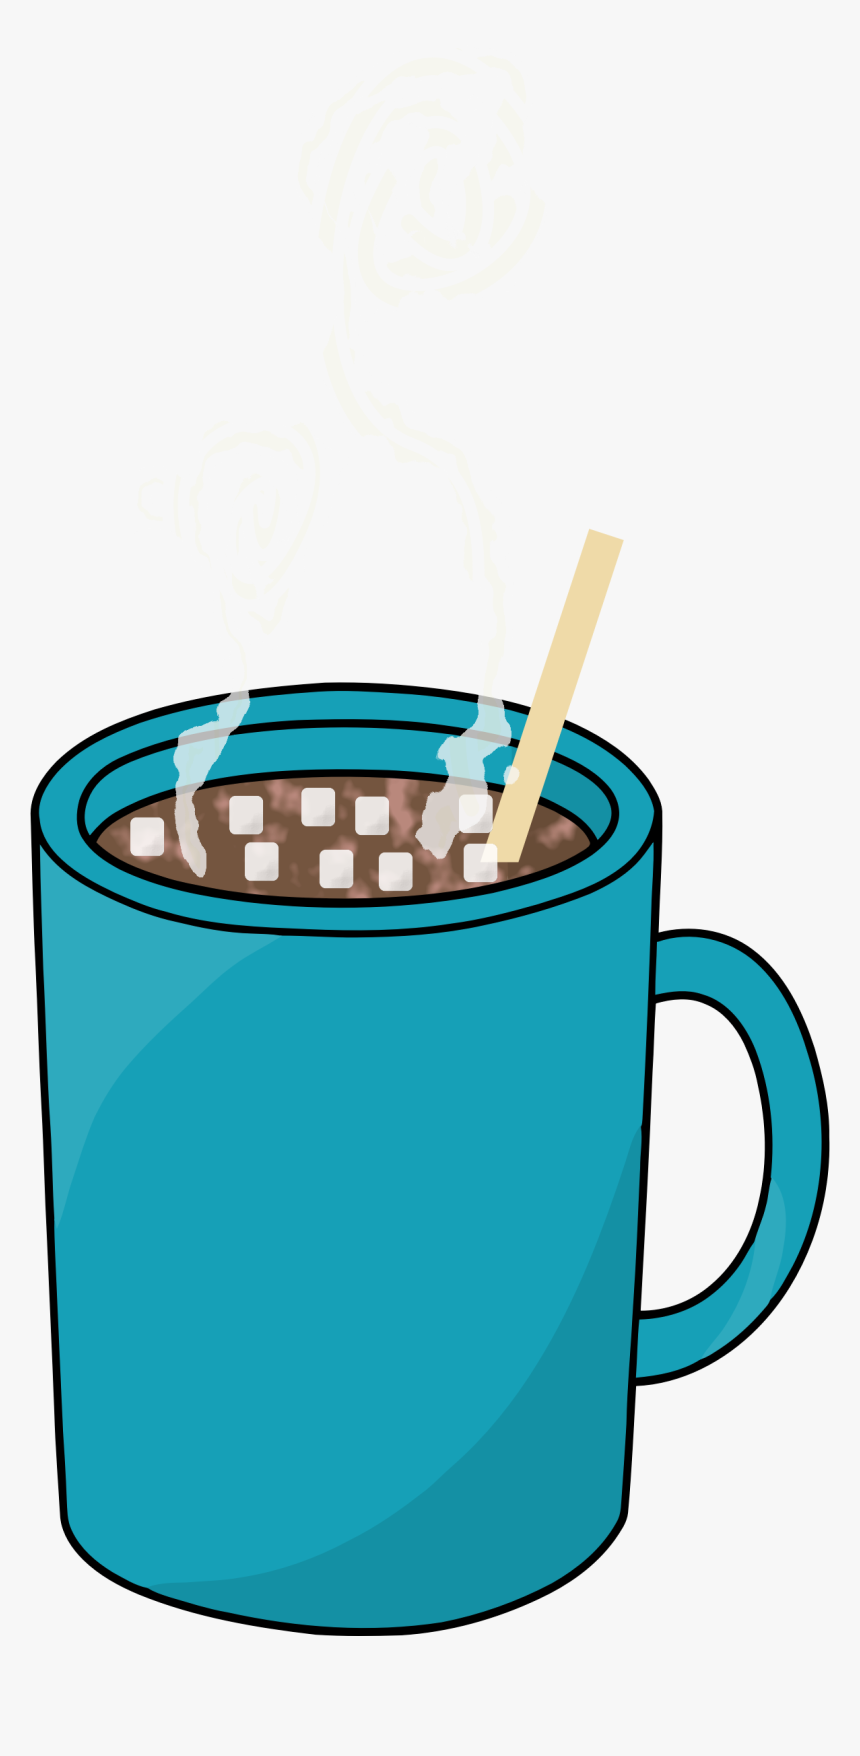 Hot Cocoa Clipart - Hot Chocolate Cup Clip Art, HD Png Download - kindpng